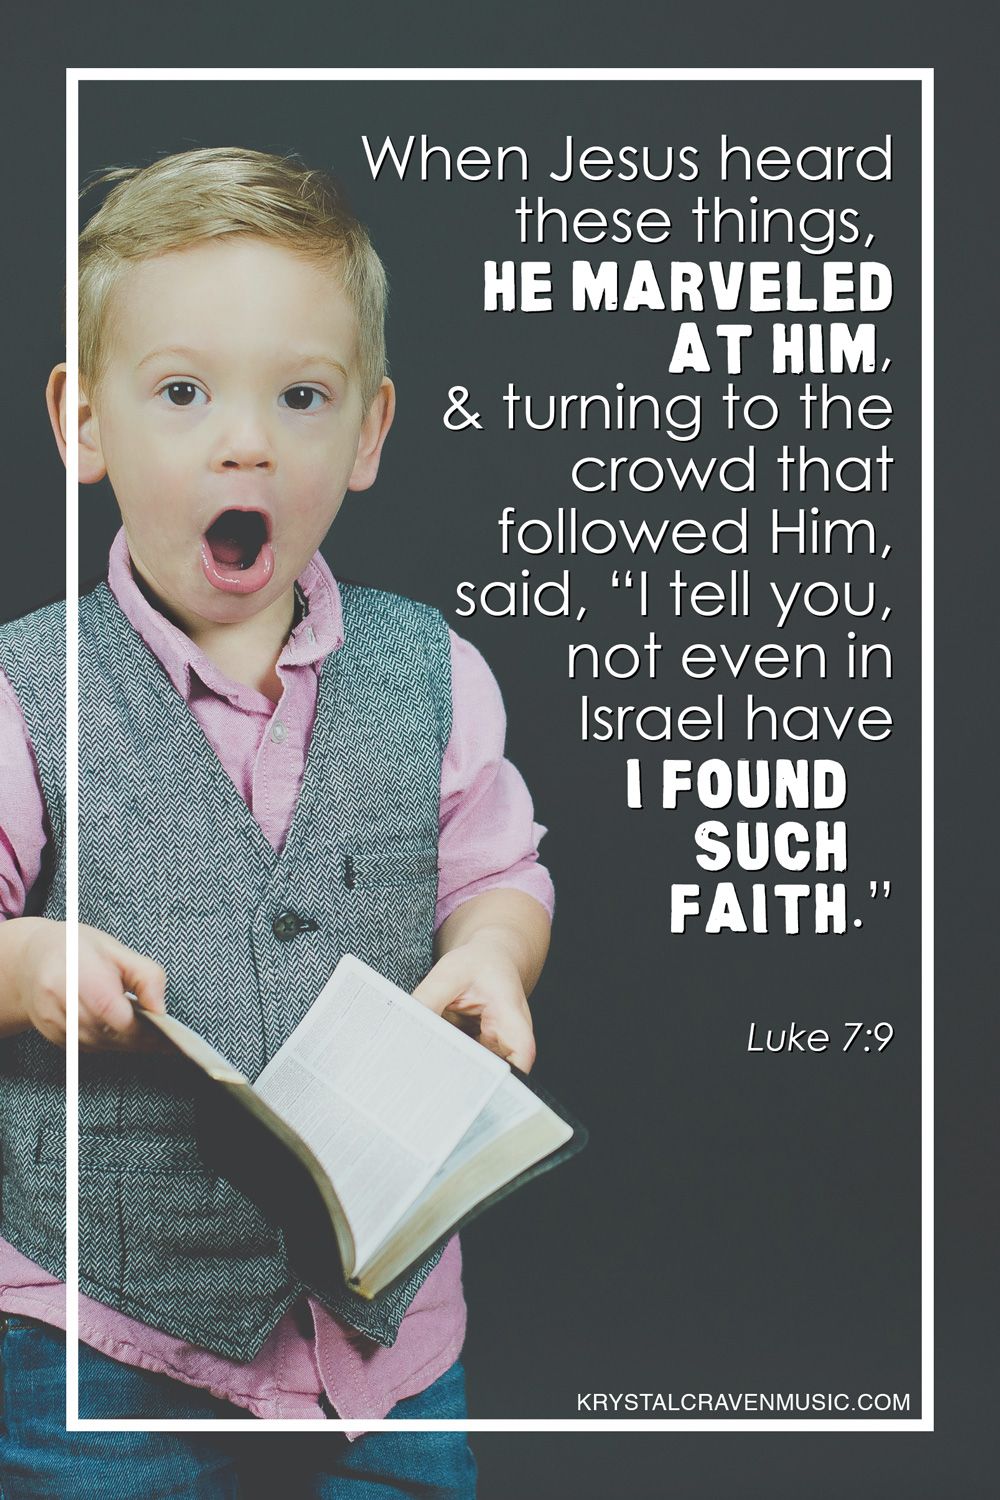 Bible verse text from Luke 7:9 of "When Jesus heard these things, He marveled at him, and turning to the crowd that followed Him, said, "I tell you, not even in Israel have I found such faith." The verse is overlaying a little boy with a marveled look on his face holding an open bible in his hands with a black background.